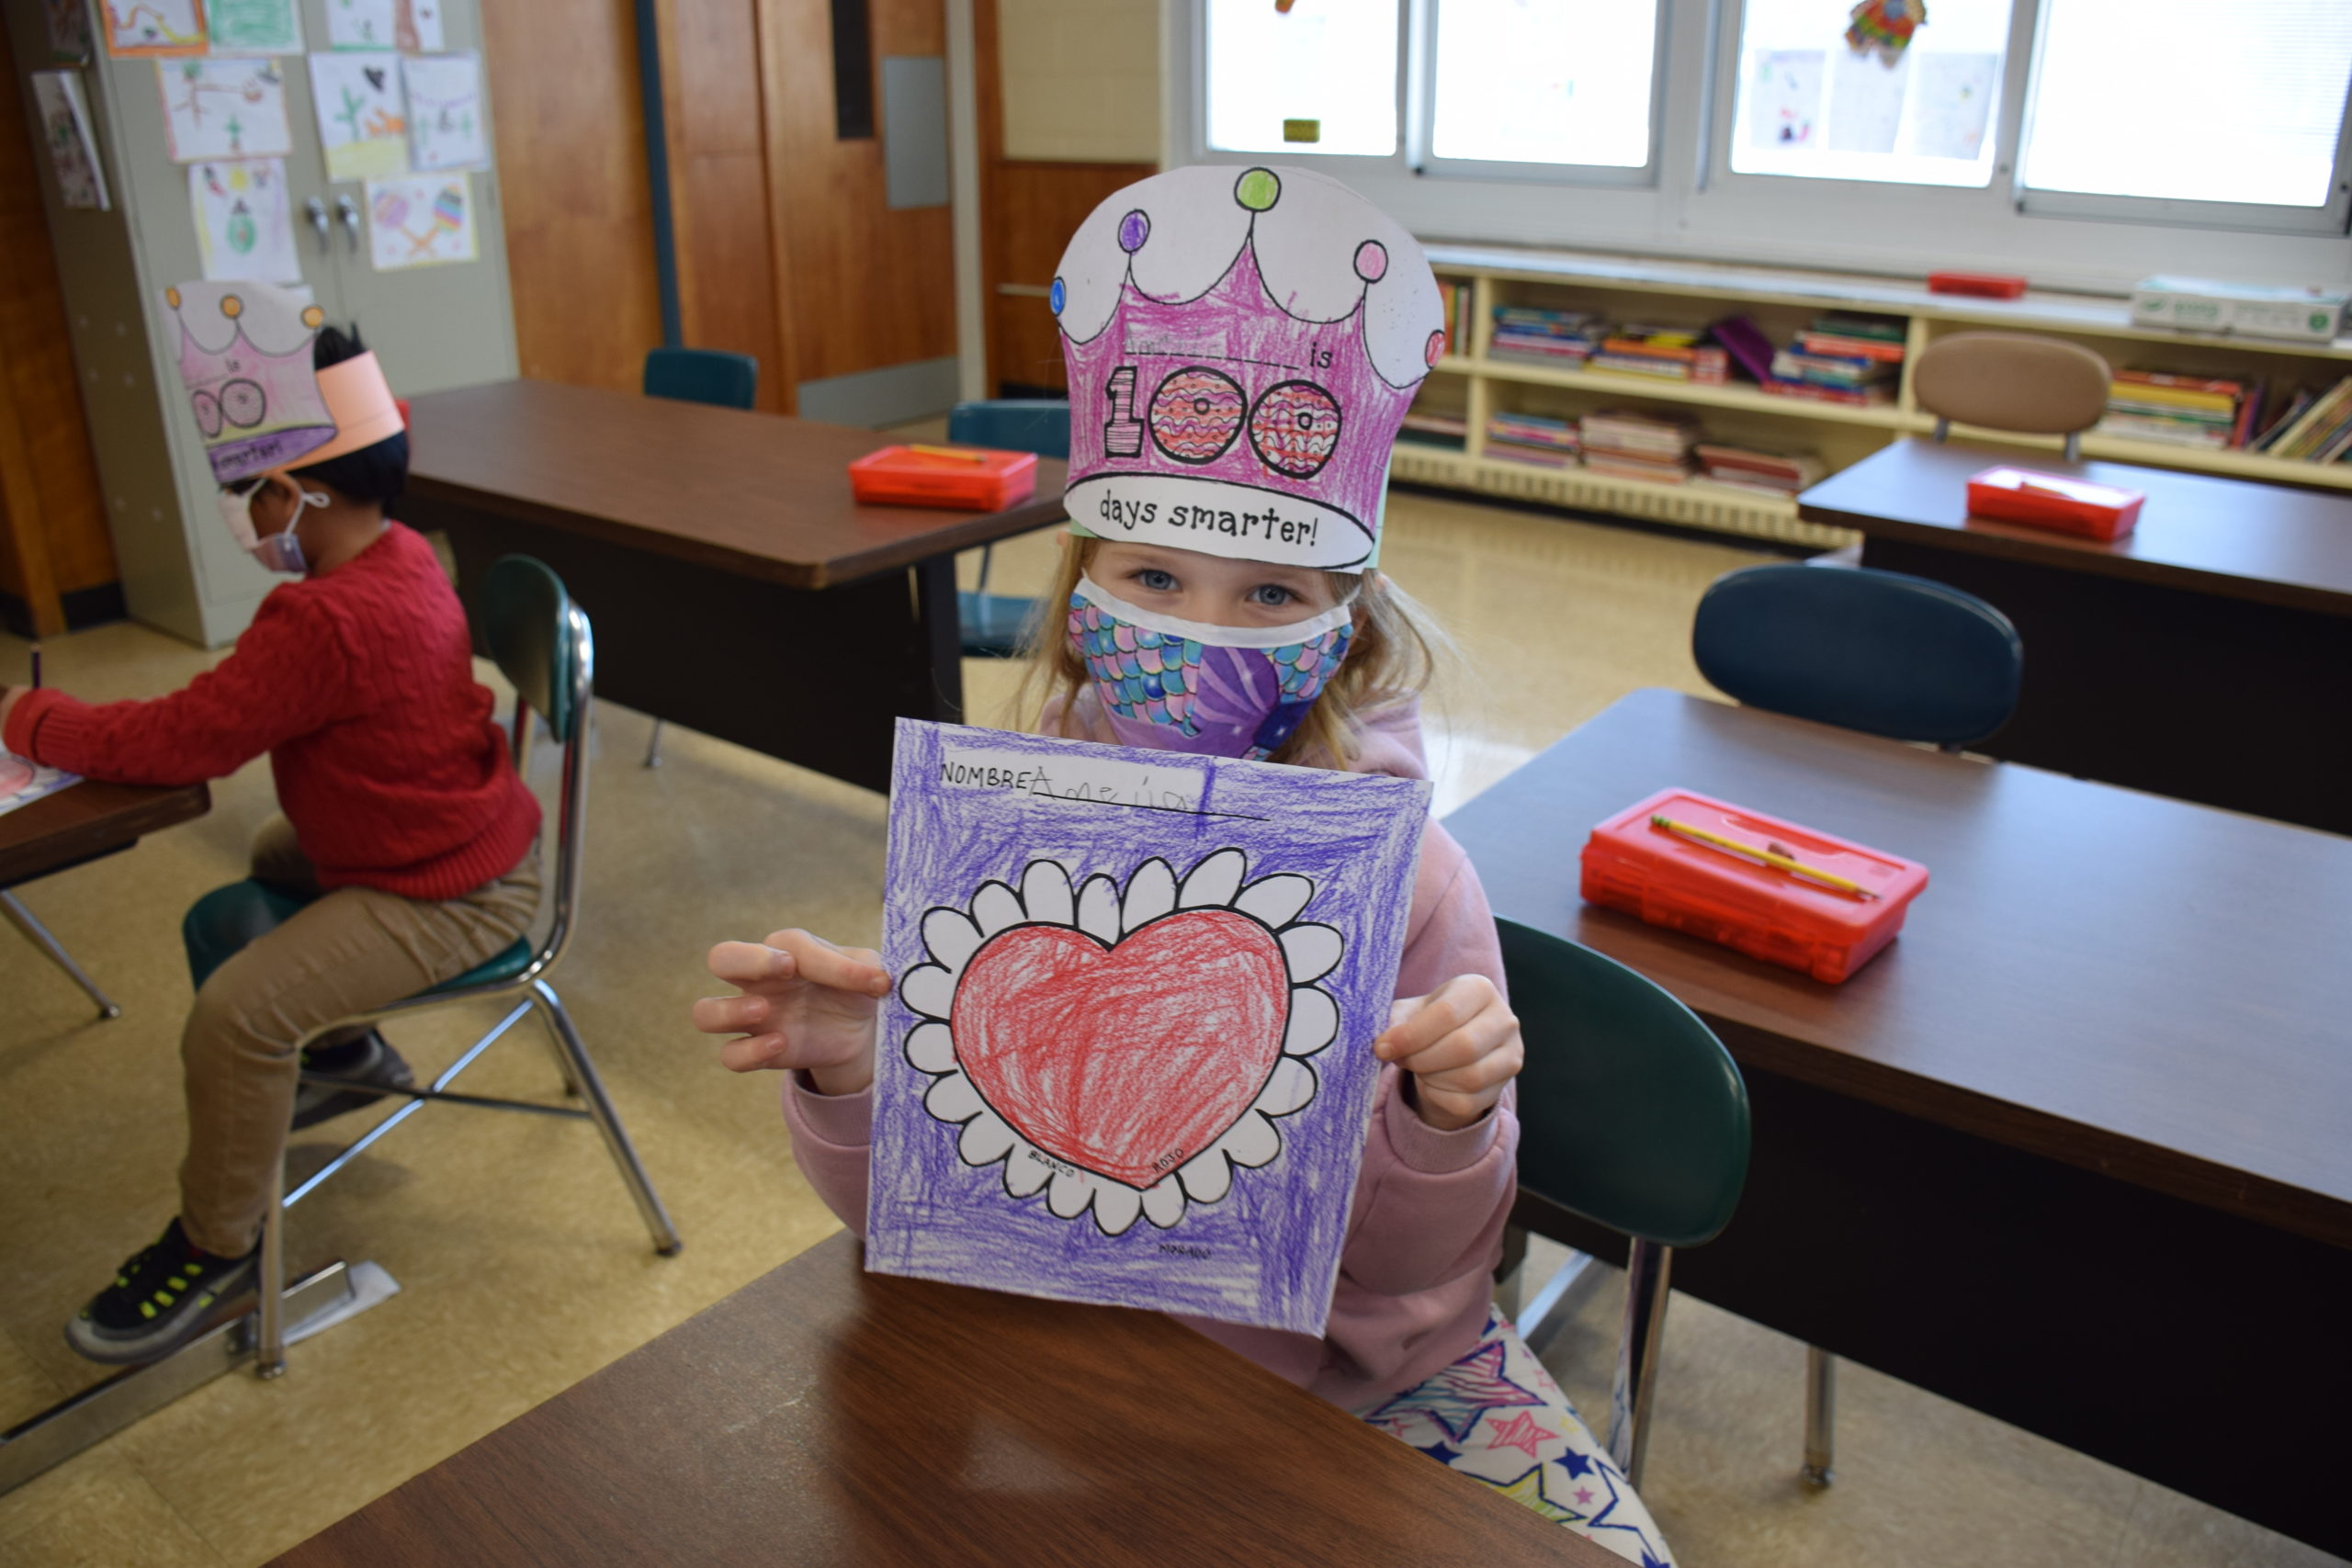 Westhampton Beach Elementary School students celebrated 100 days of school and Valentine’s Day on February 14.